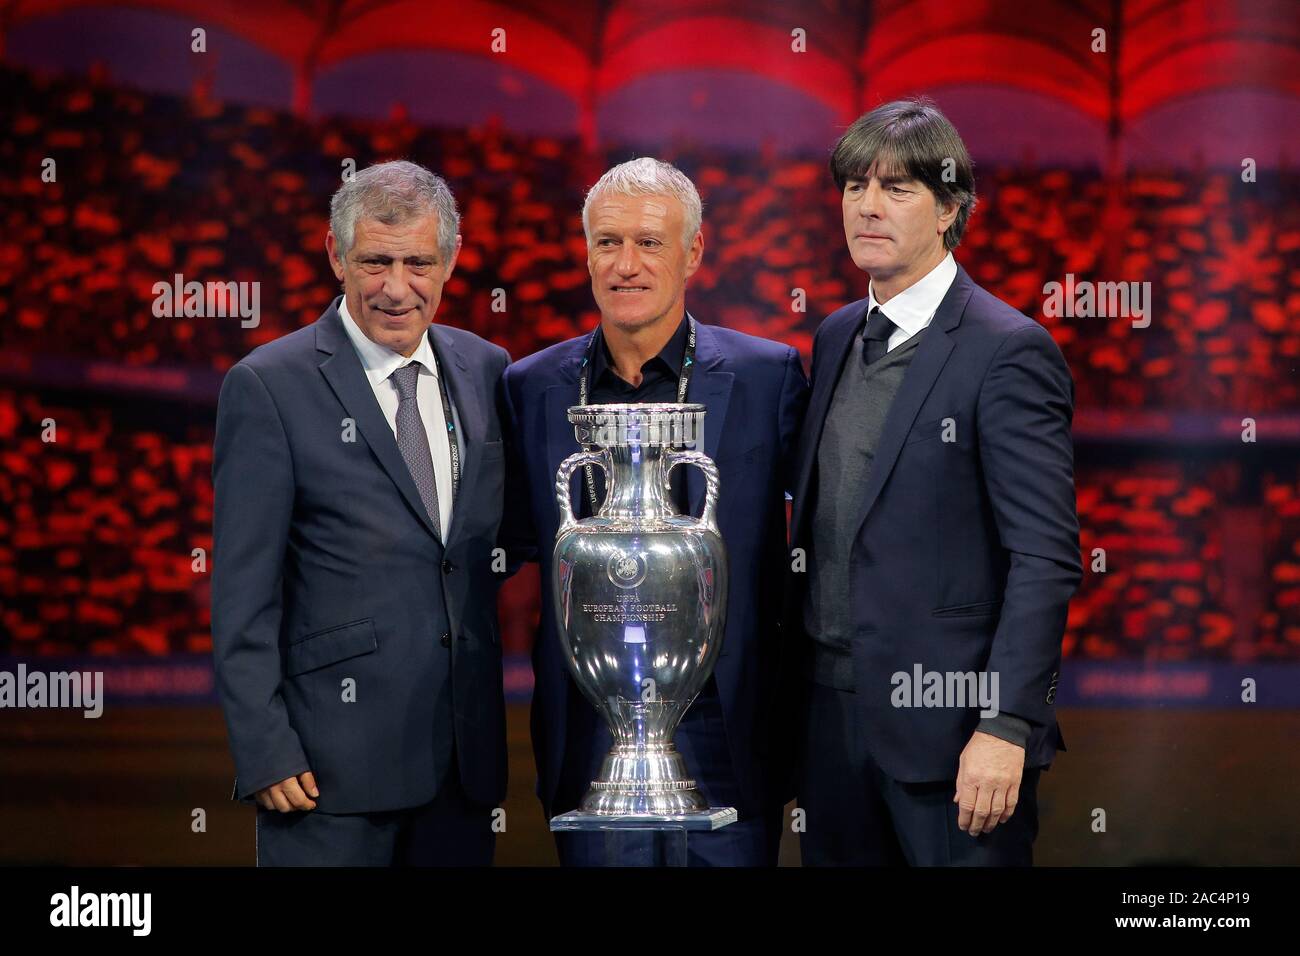 Bucharest, Romania. 30th Nov, 2019. (L-R) Head coach of Portugal Fernando Santos, head coach of France Dider Deschamp and head coach of Germany Joachim Loew pose with the trophy during the draw of the UEFA Euro 2020 soccer tournament finals in Bucharest, capital of Romania, Nov. 30, 2019. Credit: Cristian Cristel/Xinhua/Alamy Live News Stock Photo